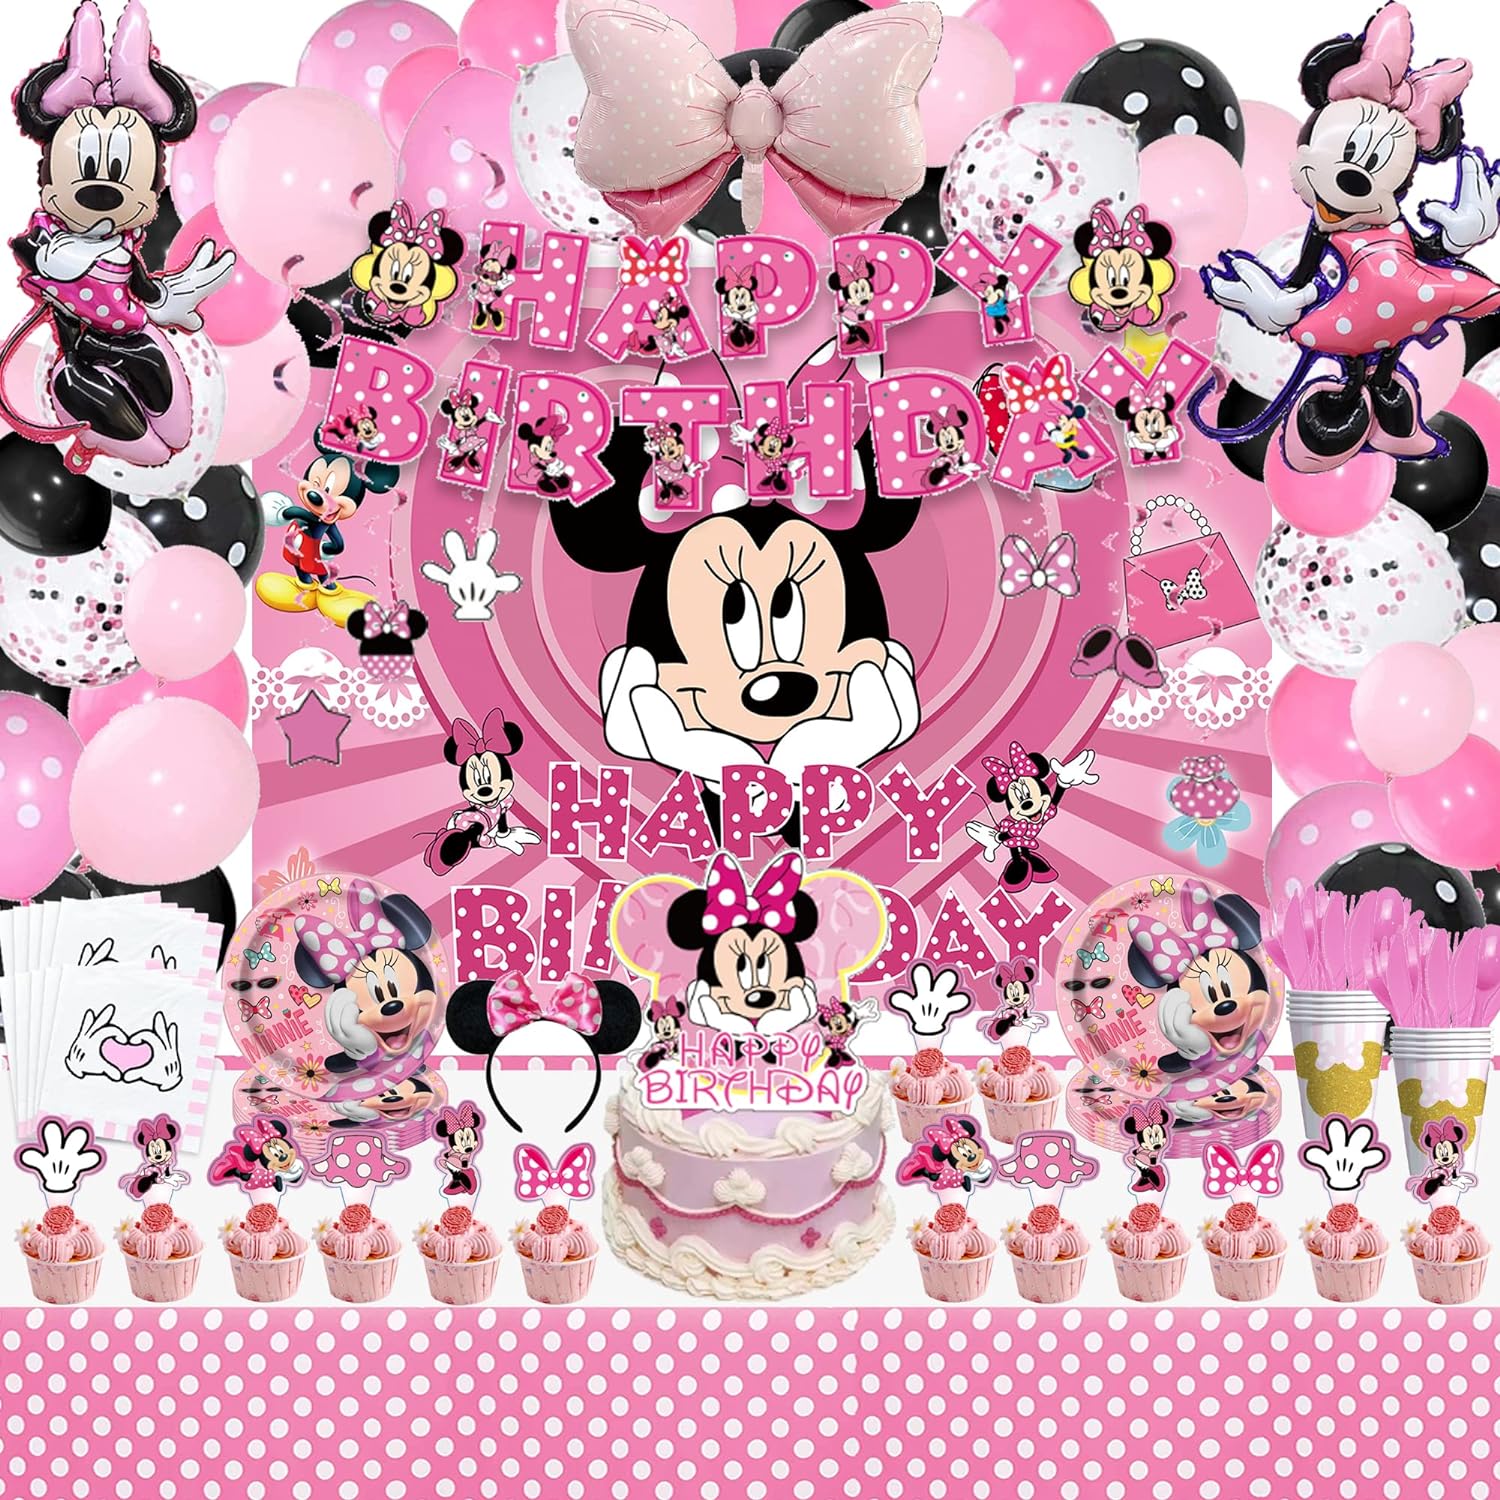 Magical Minnie Mouse Birthday Party Ideas for Kids